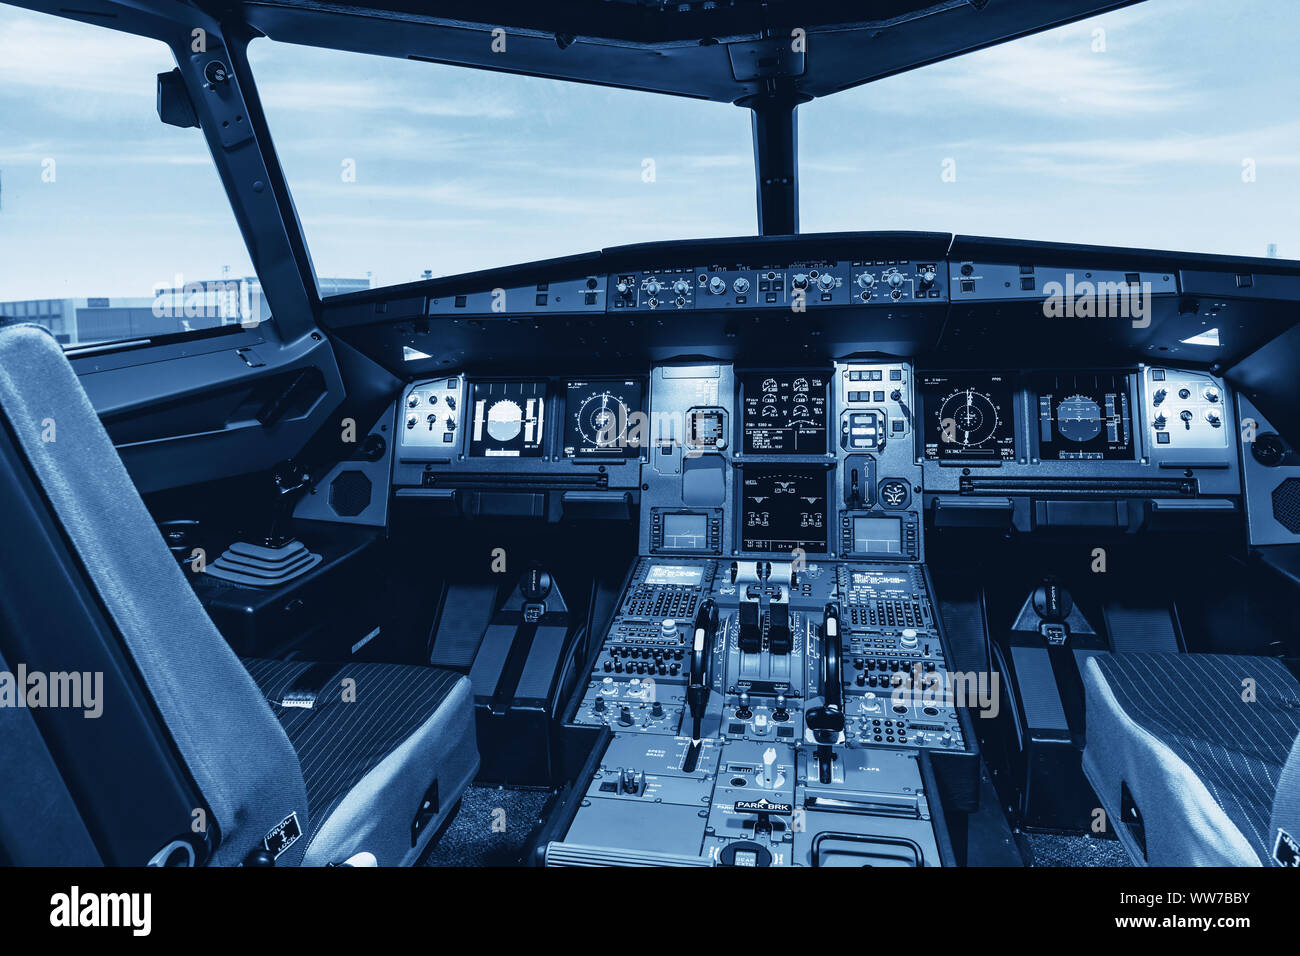 Cockpit of airliner simulator. Switches and dials visible in the background  Stock Photo - Alamy